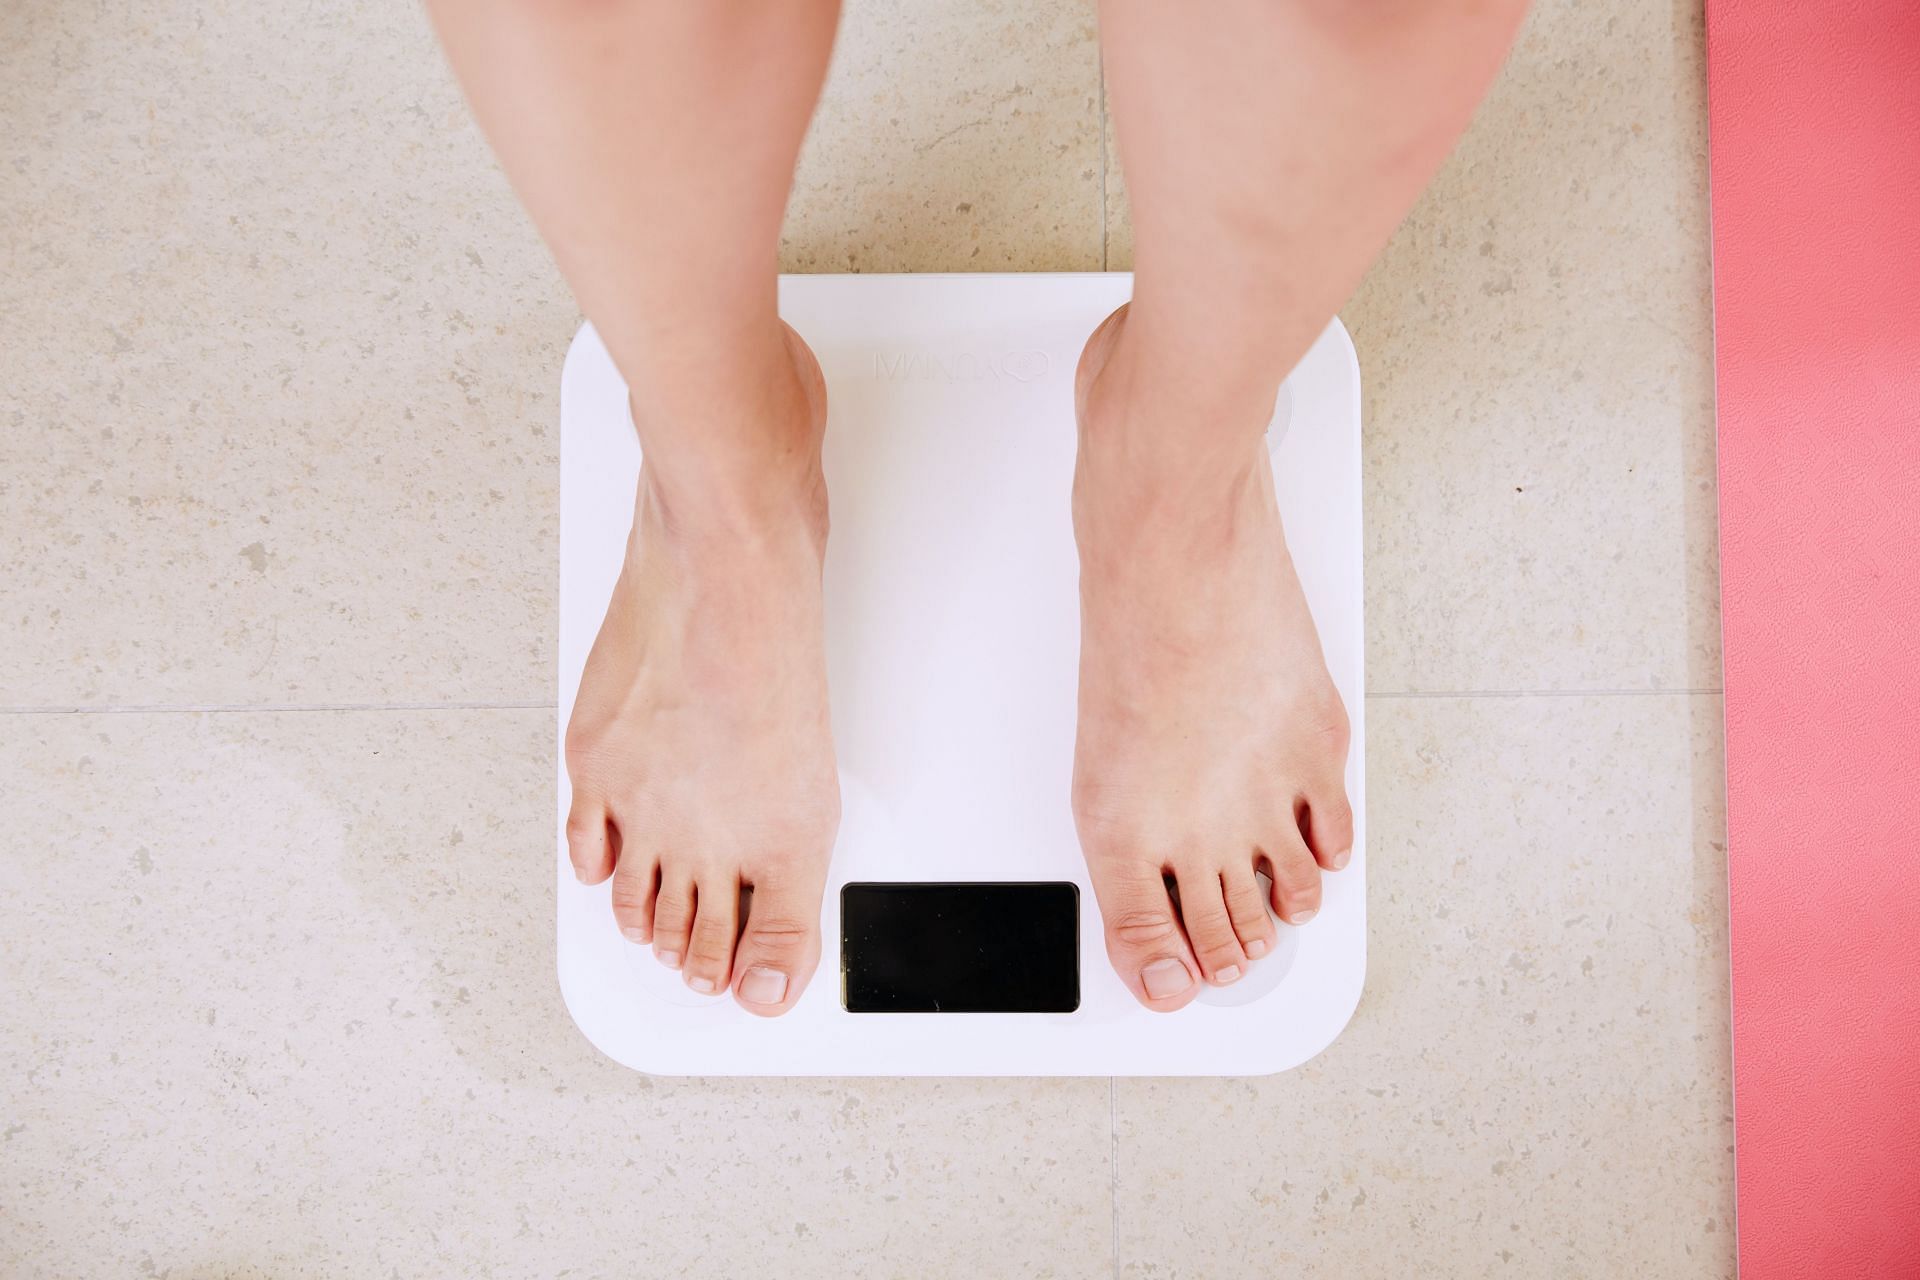 Weight changes are closely linked to physical signs of depression. (Image via Unsplash/I Yunmai)